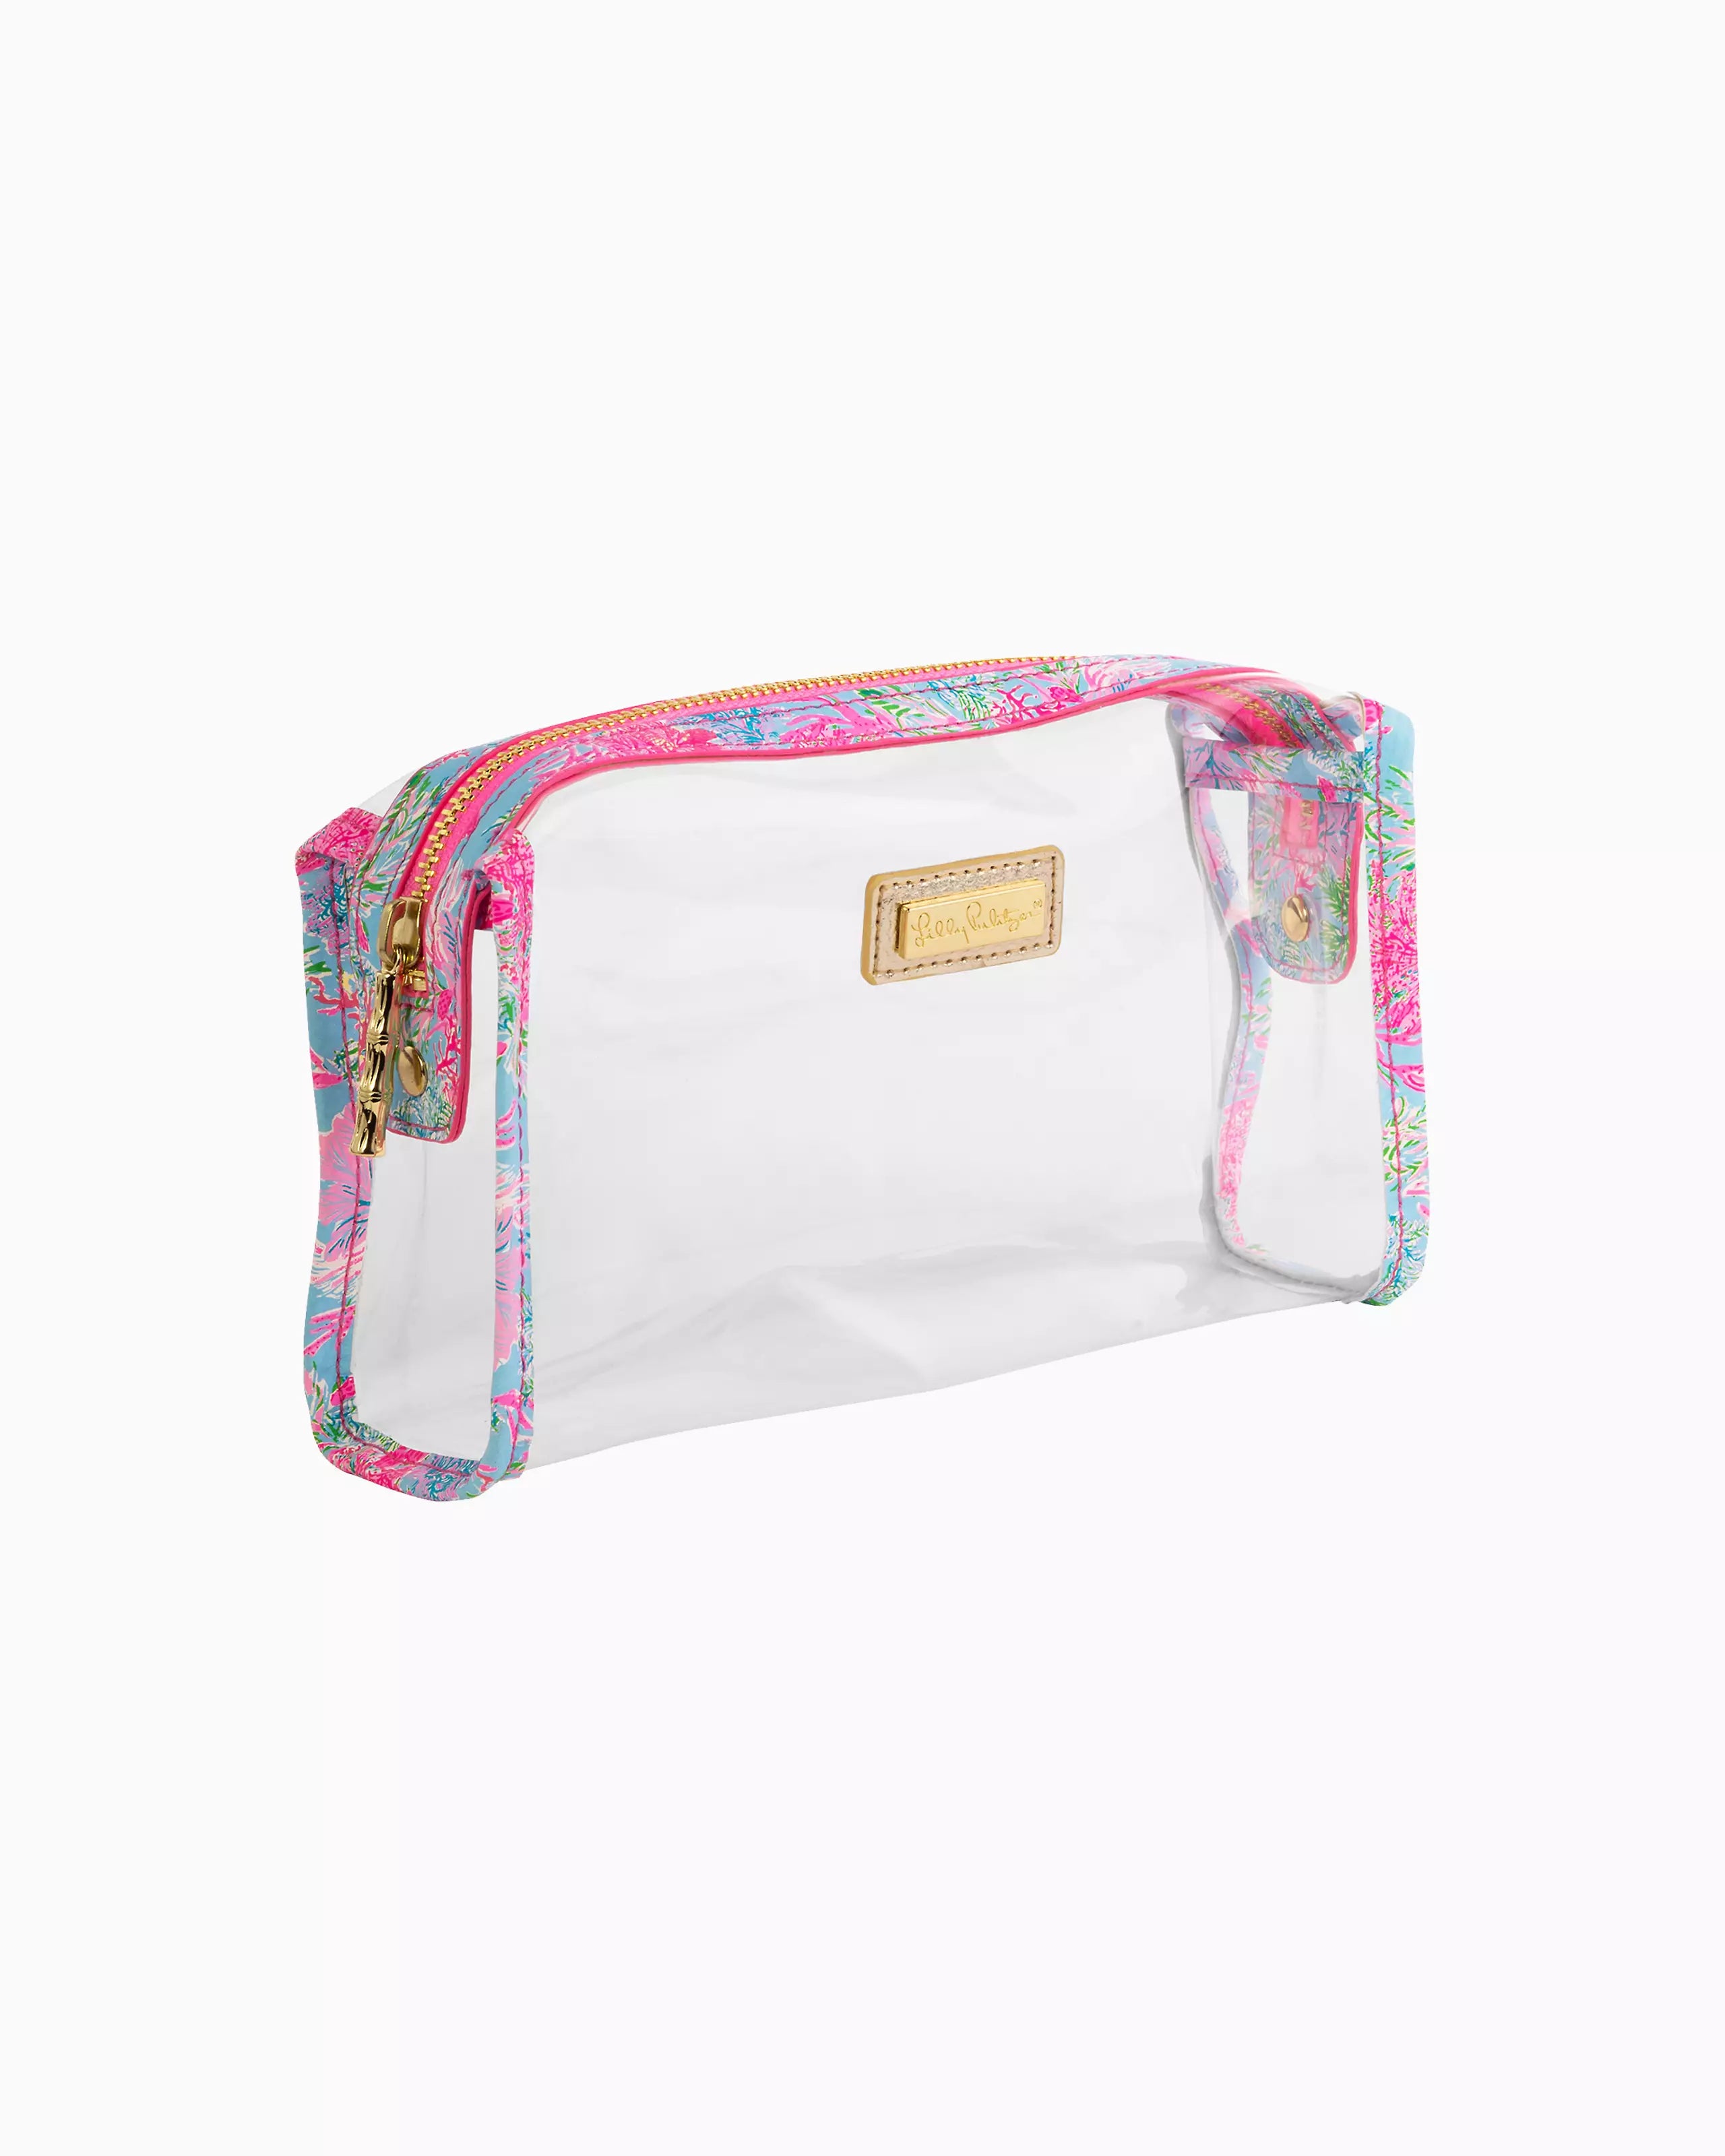 Pencil Case by Lilly Pulitzer - Cay To My Heart